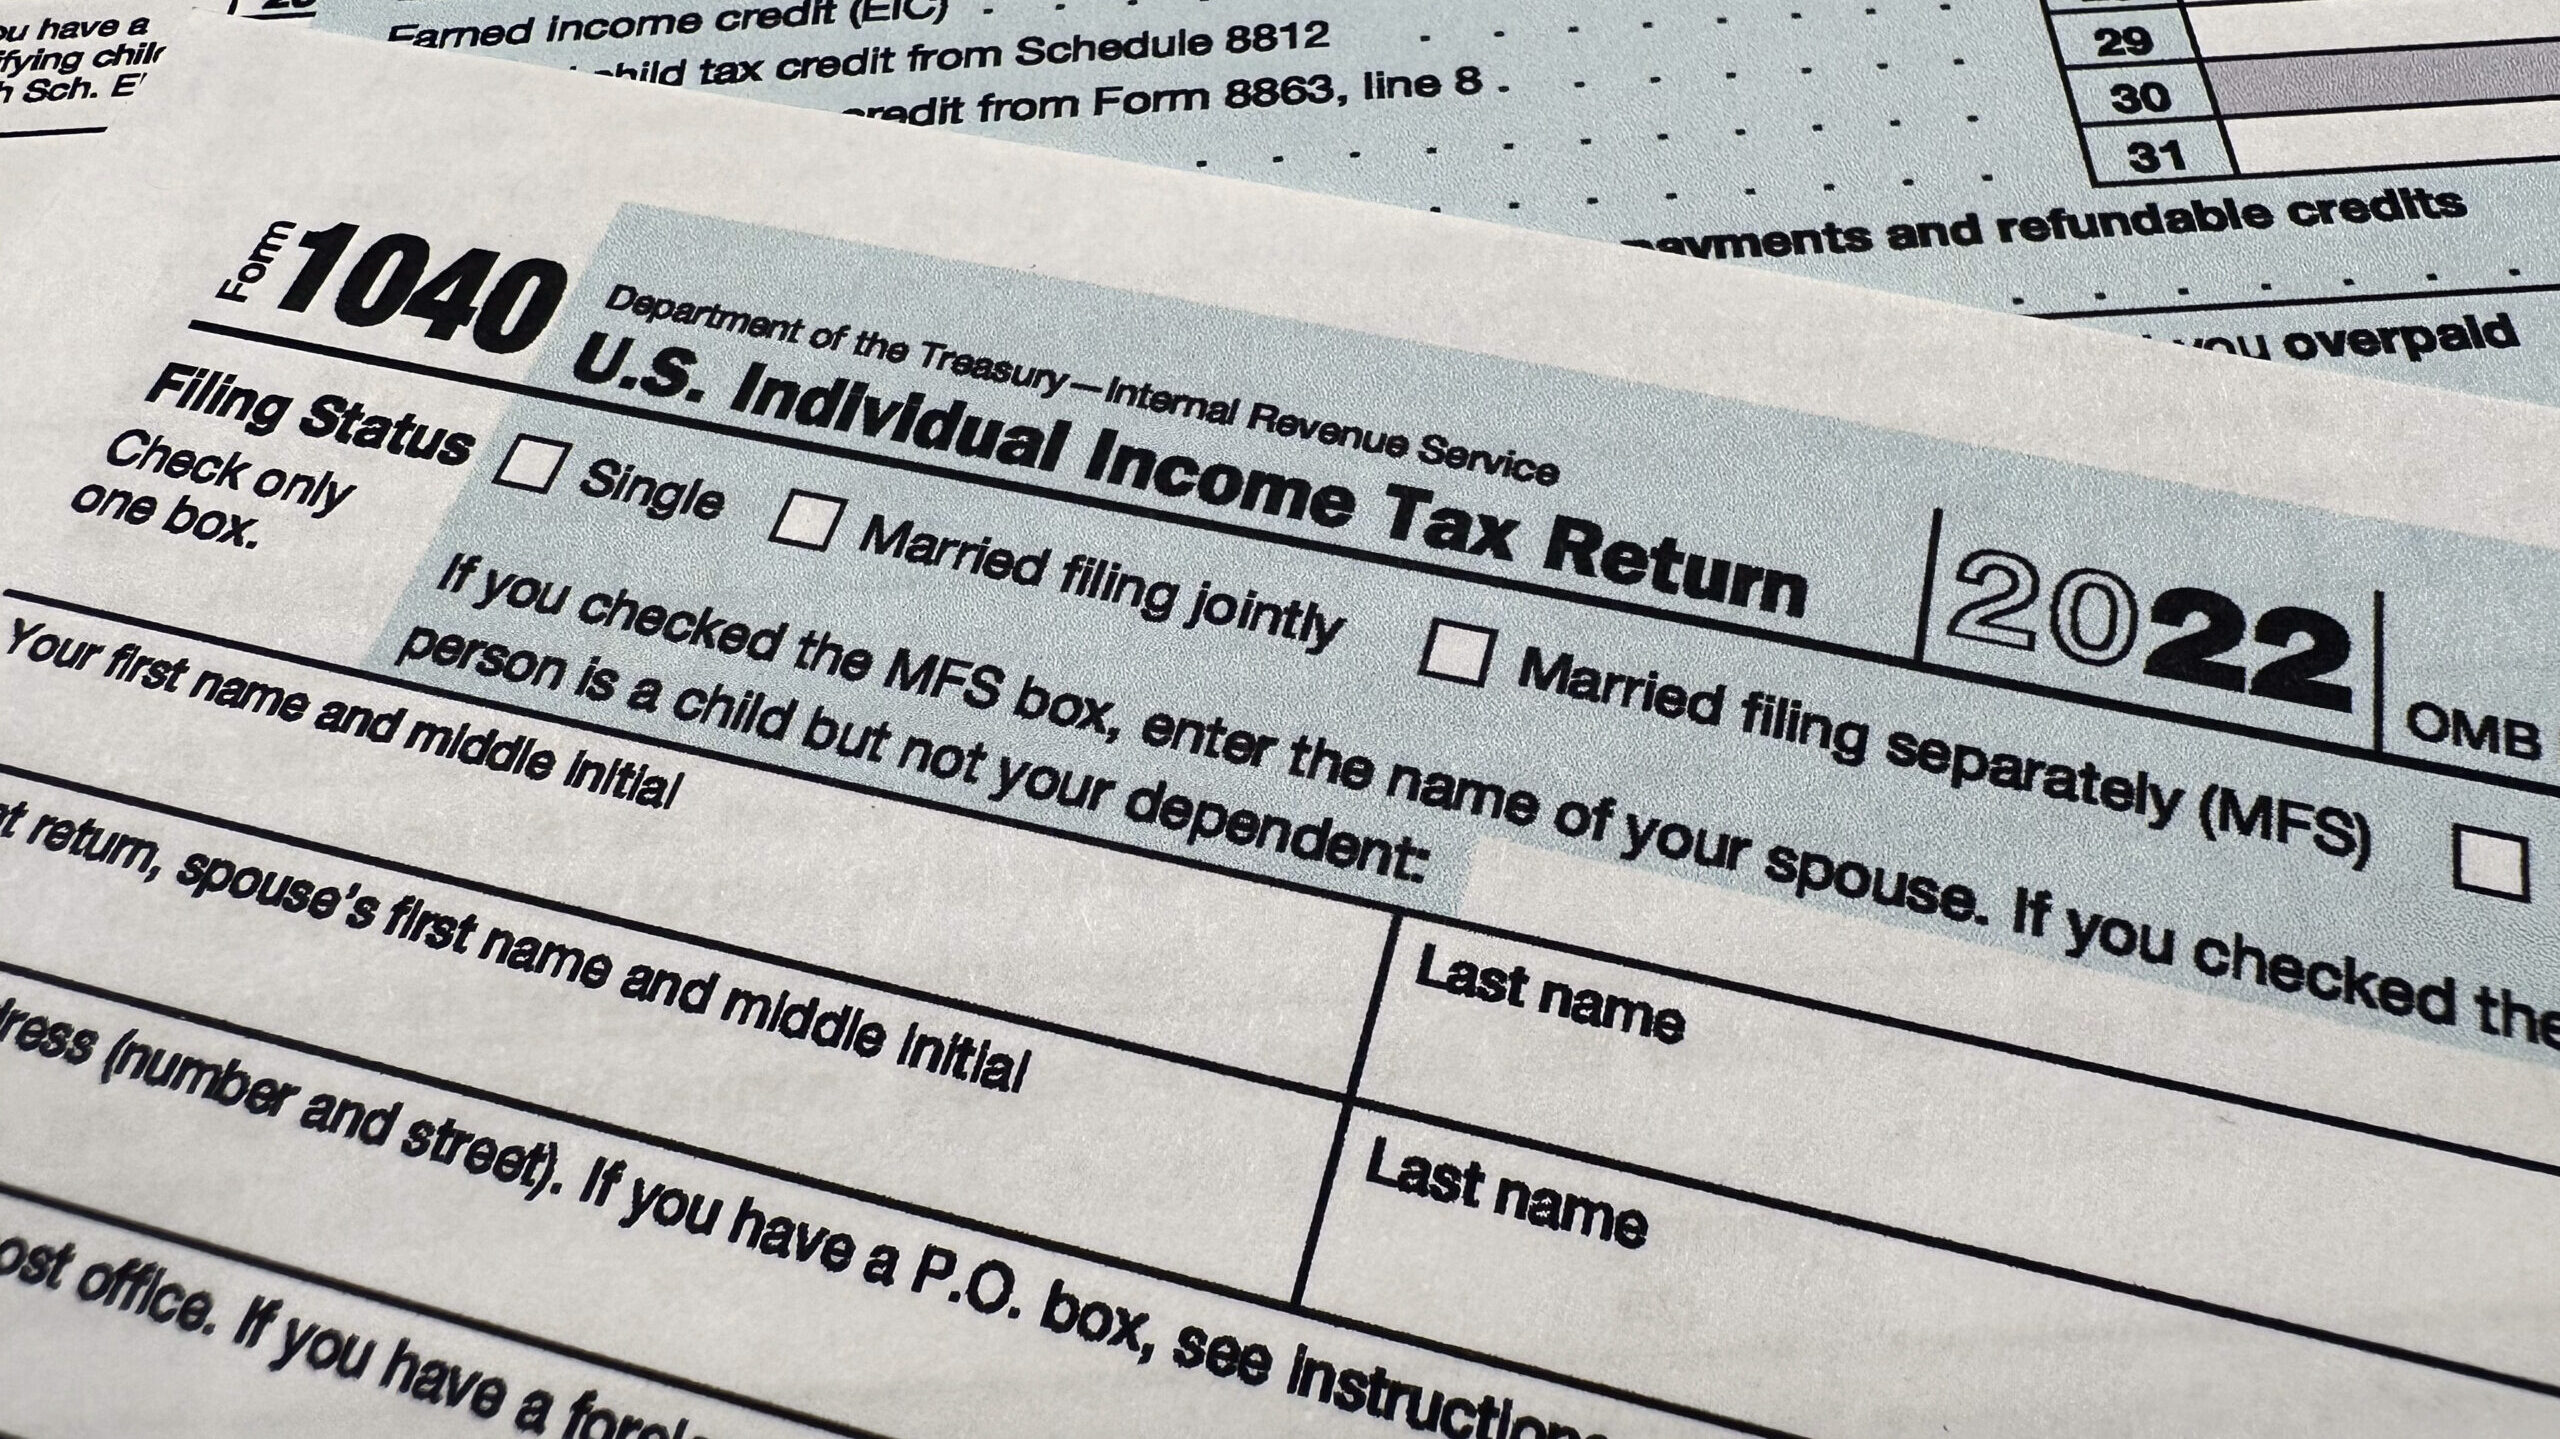 1040 form shown, tax refund season is here...